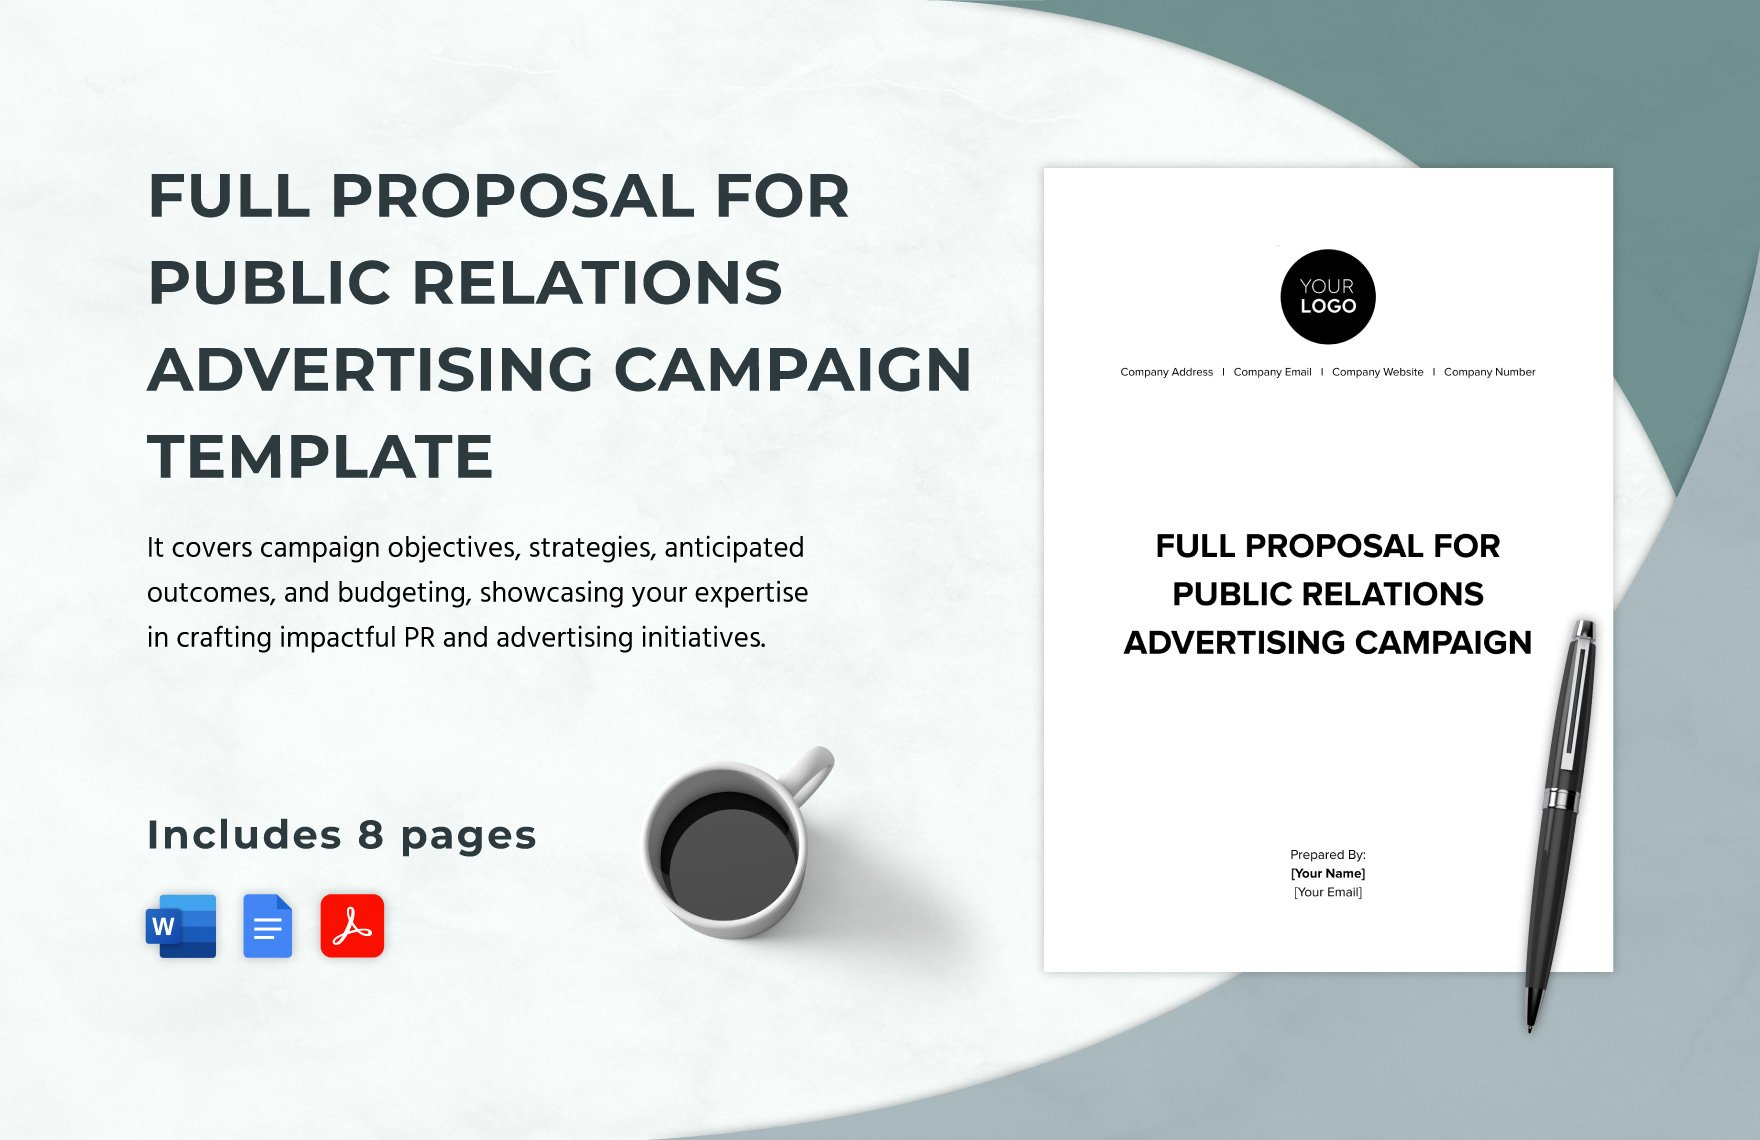 Full Proposal for Public Relations Advertising Campaign Template in Word, Google Docs, PDF